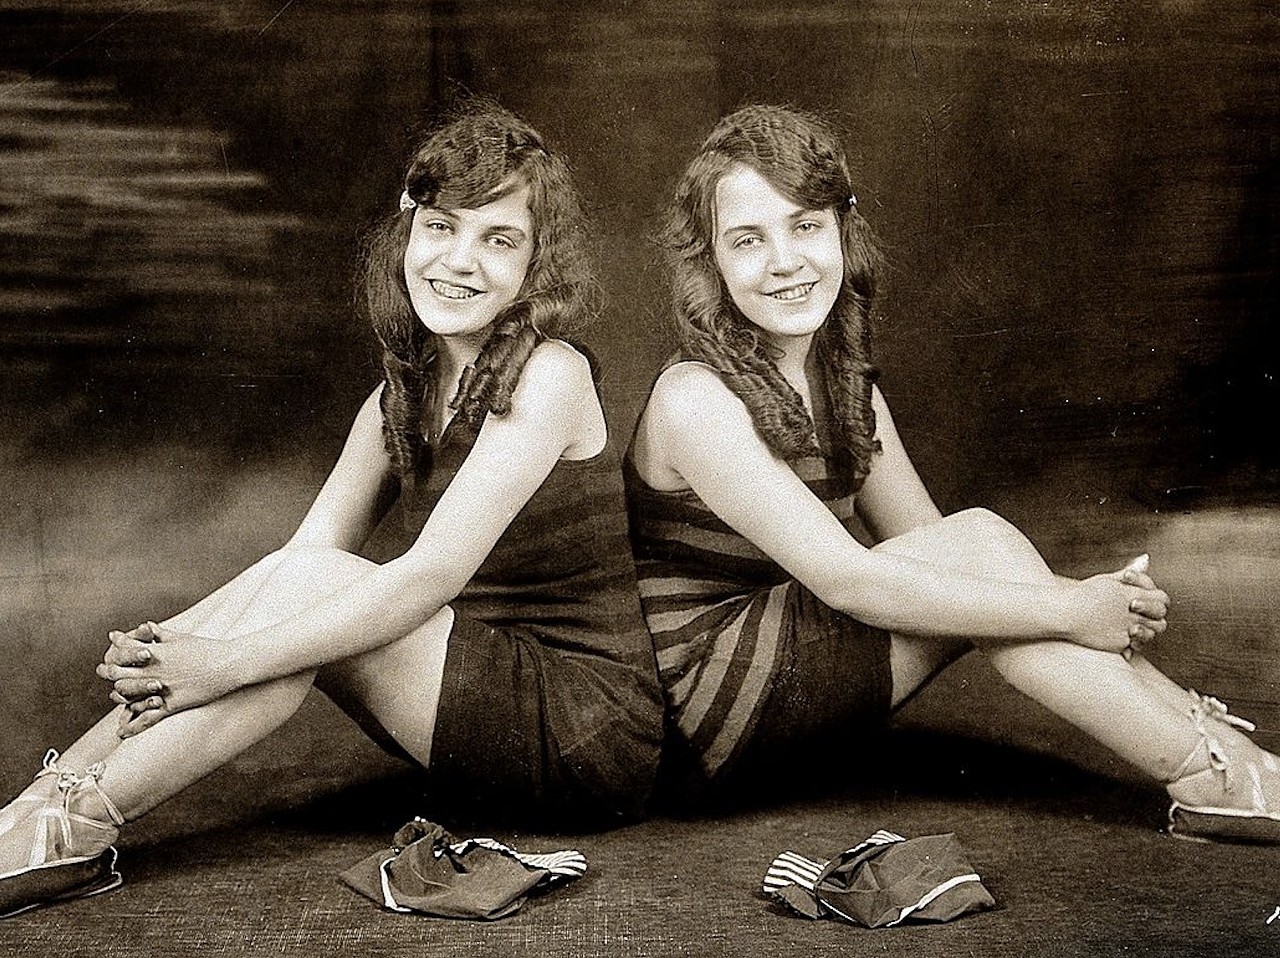 Daisy and Violet Hilton
English-born conjoined twins Daisy and Violet Hilton became popular vaudeville performers while they lived in San Antonio during the early 20th century. The twins also appeared in the 1932 horror film Freaks.